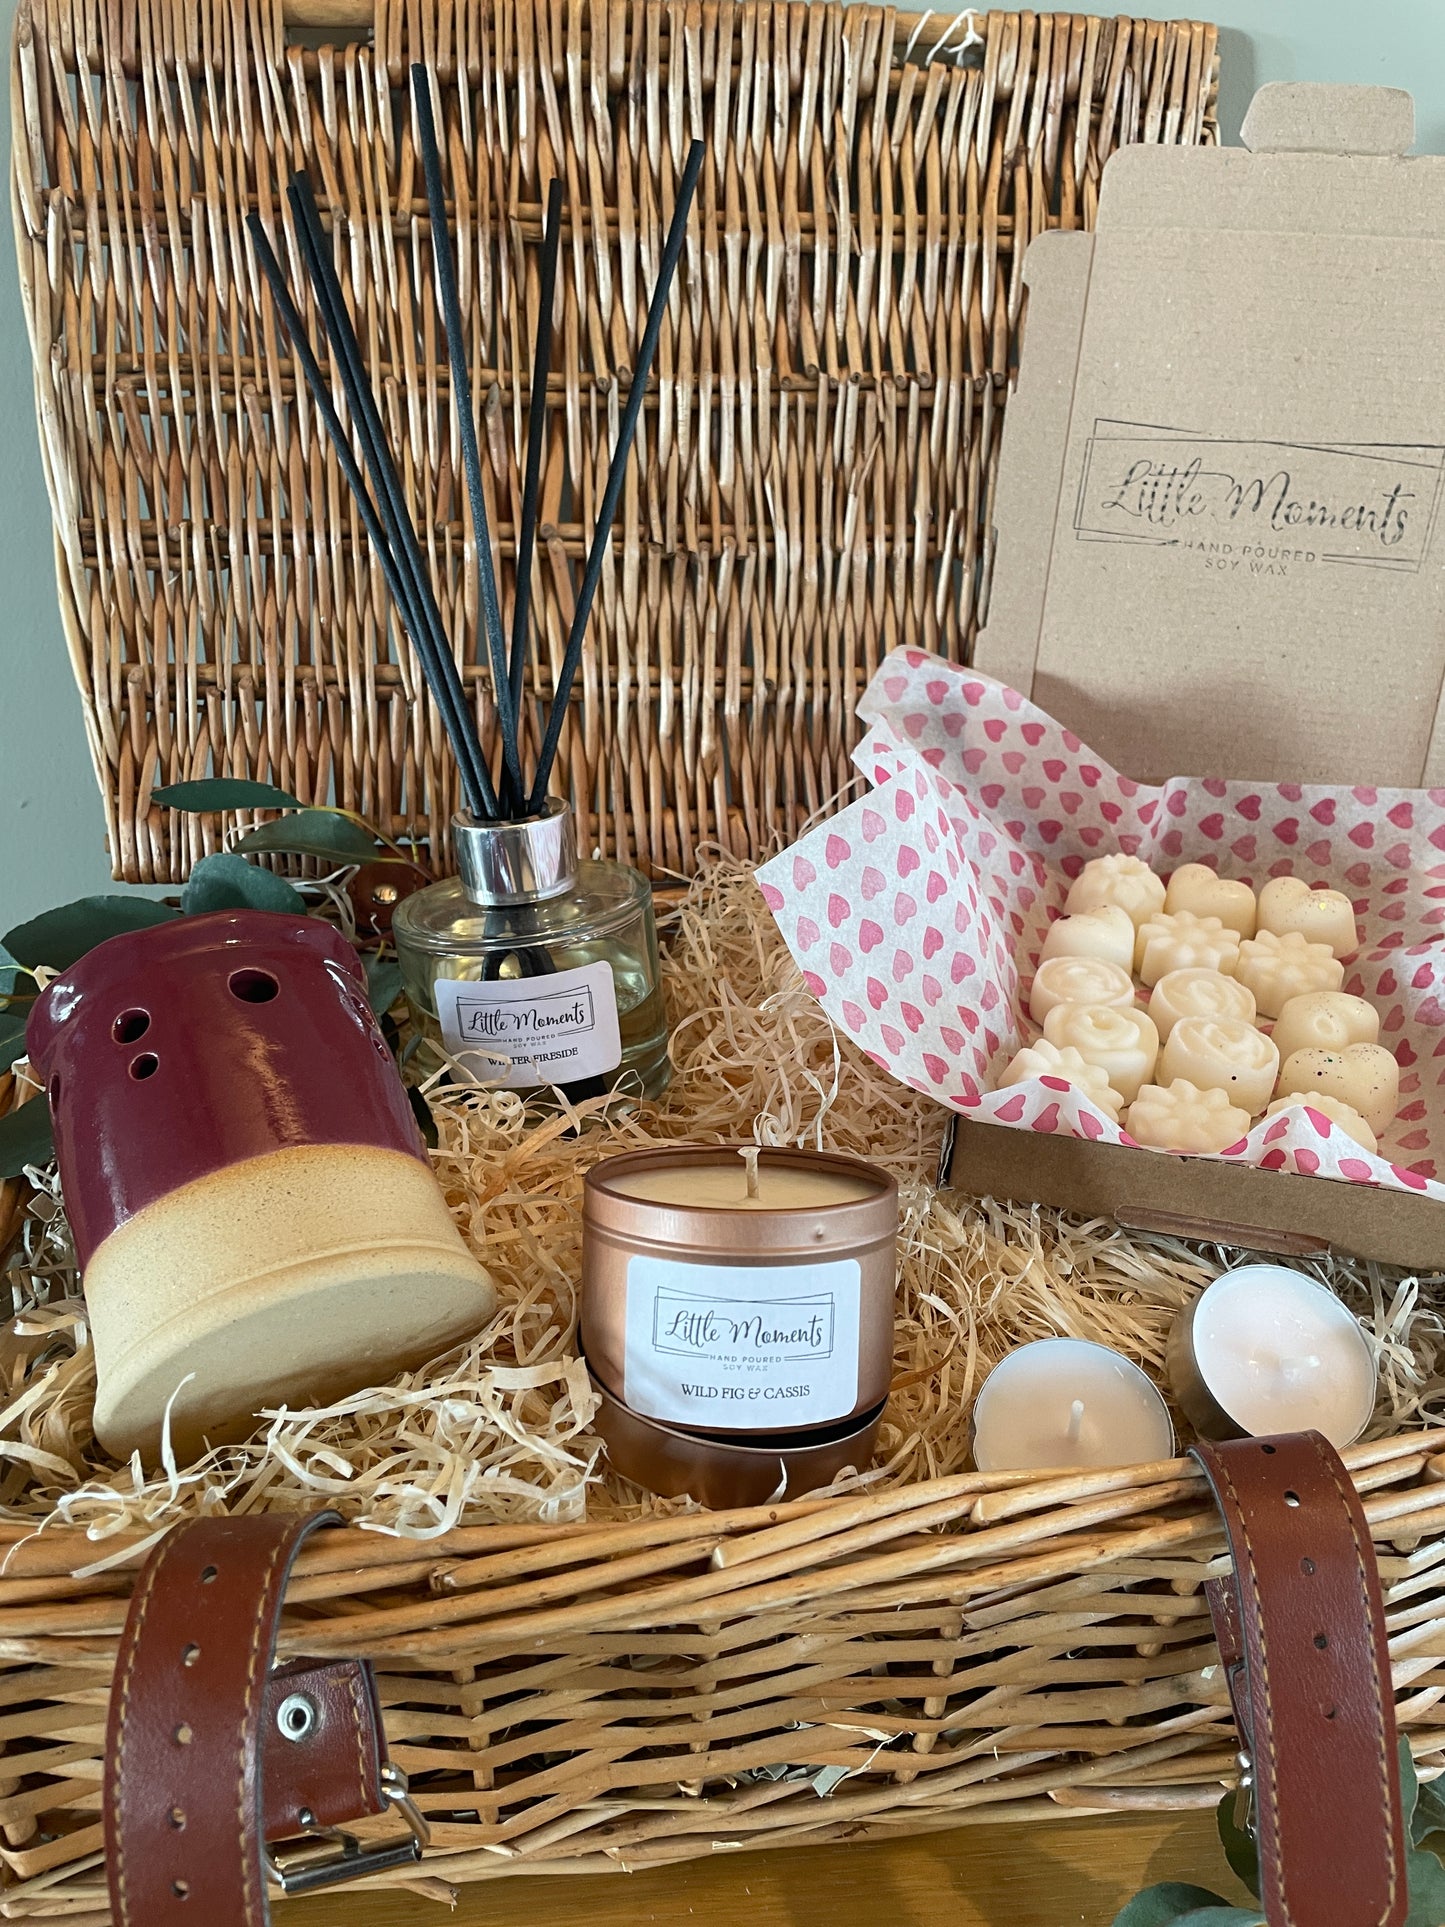 wicker basket gift hamper with hand poured candle reed diffuser wax melts wax melt burner